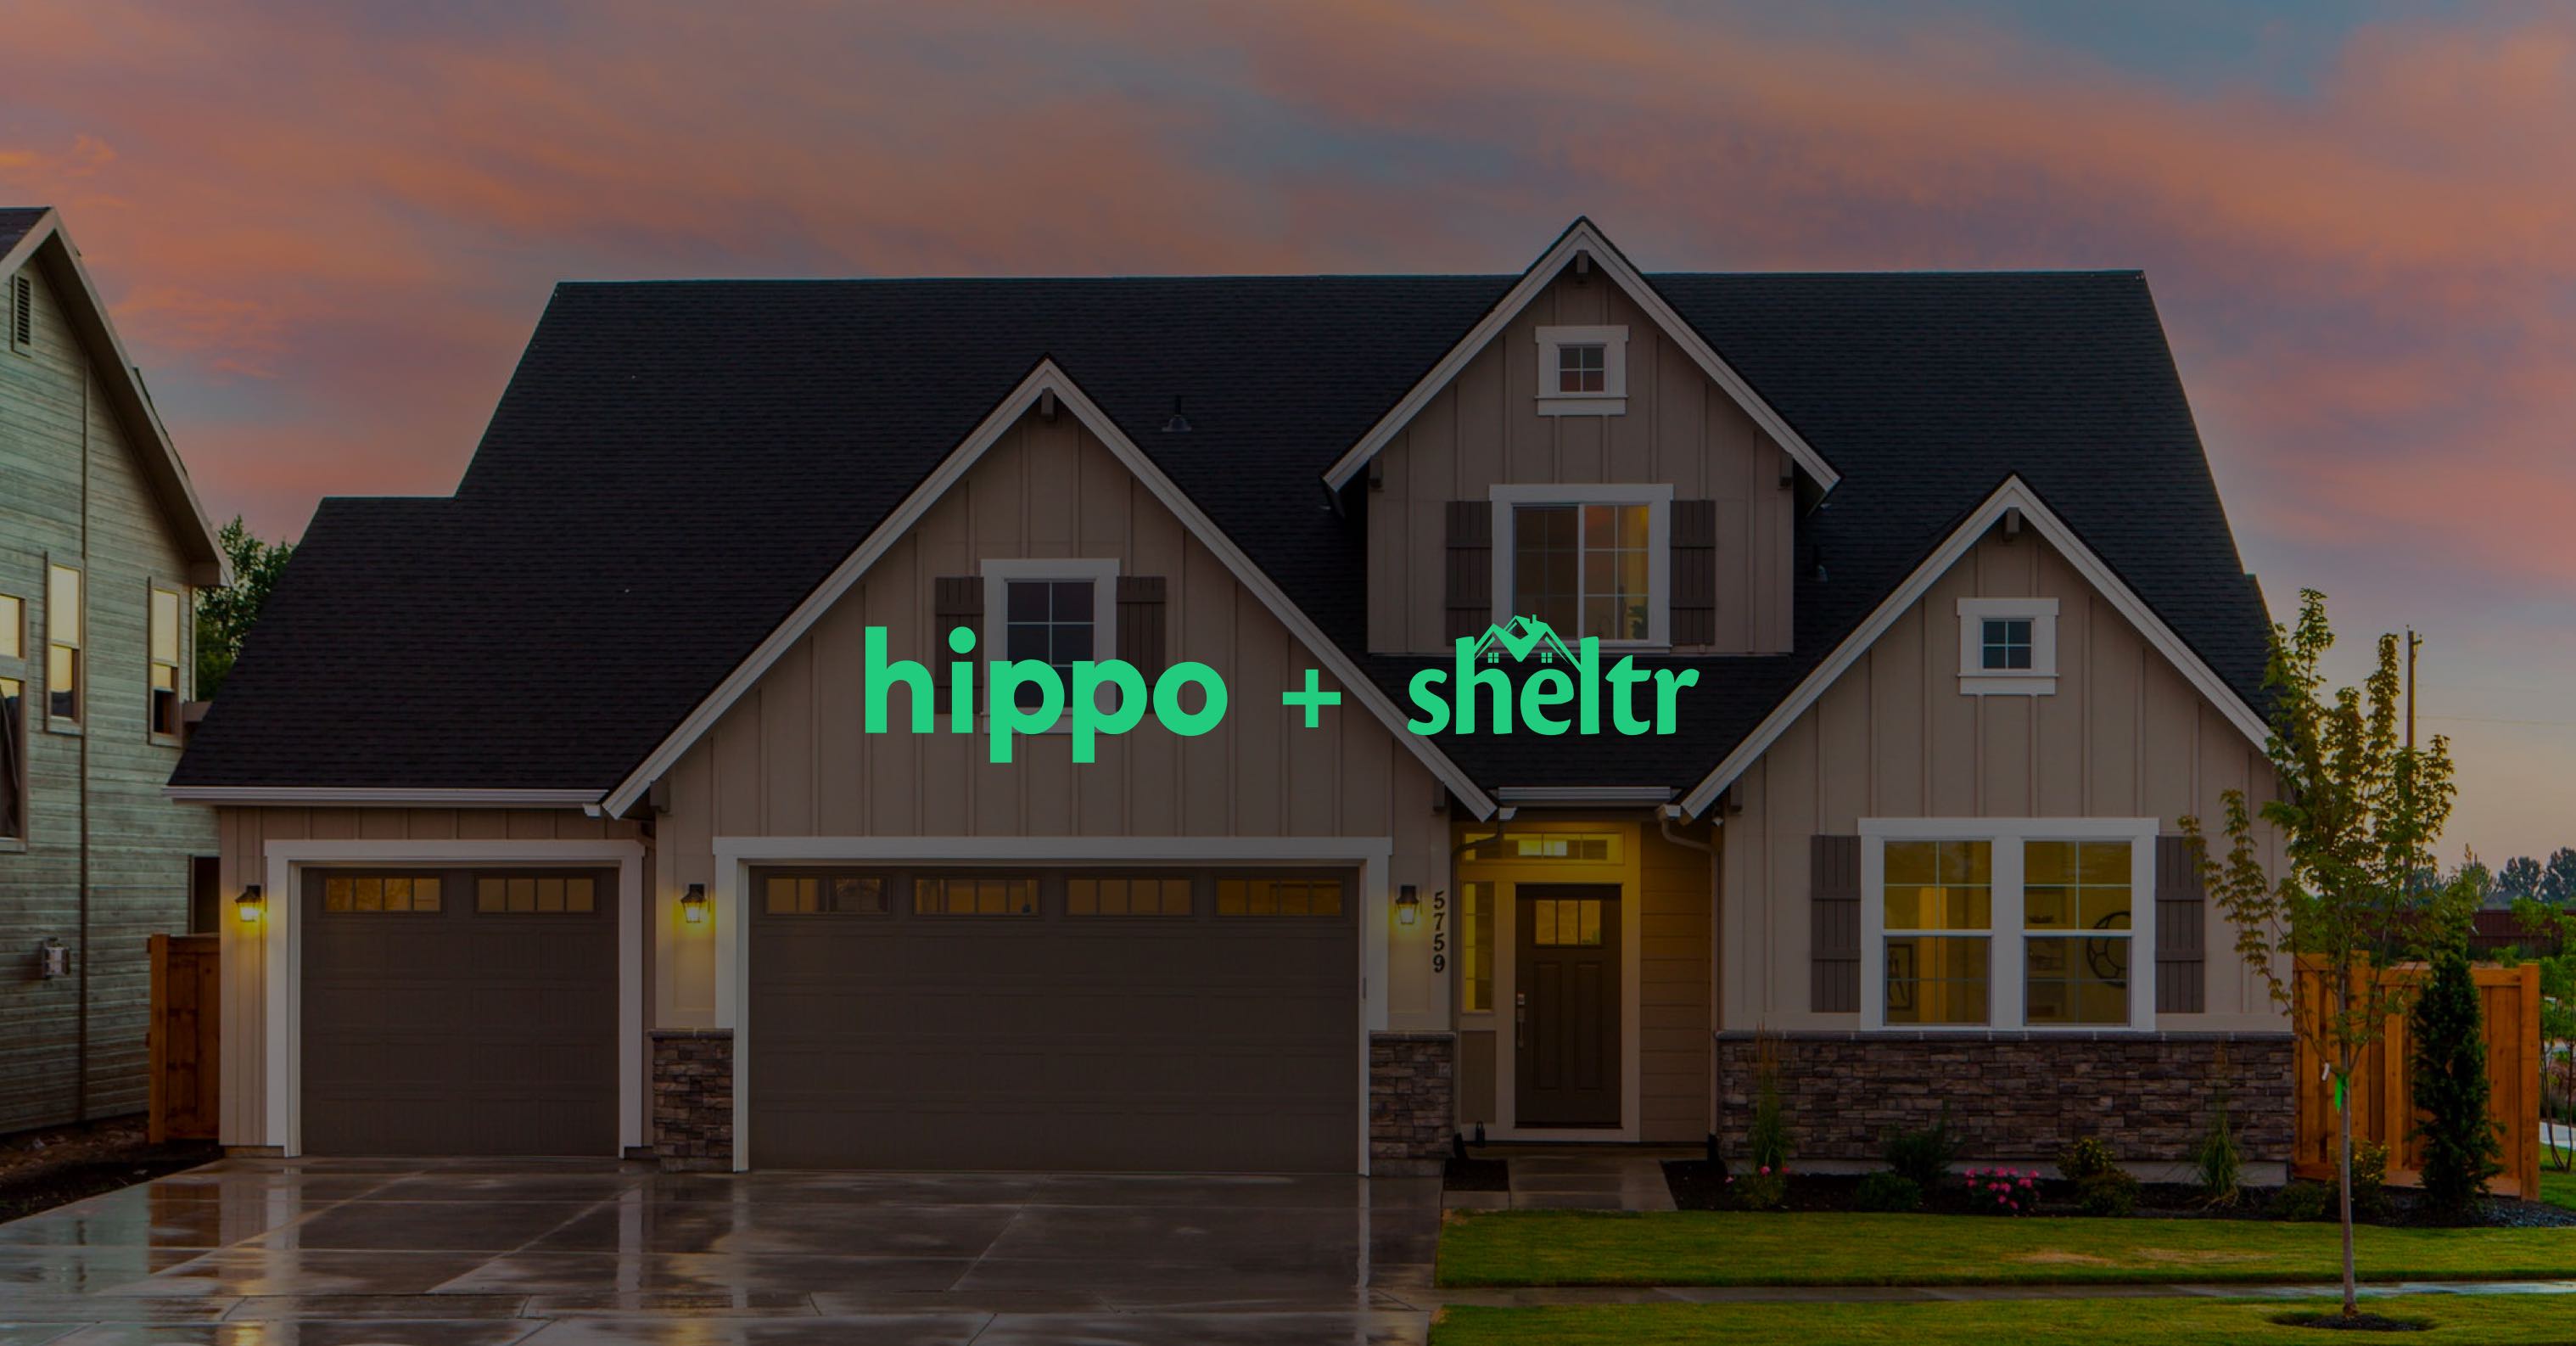 Together Sheltr and Hippo will provide customers with peace of mind through better home insurance and protective home maintenance.